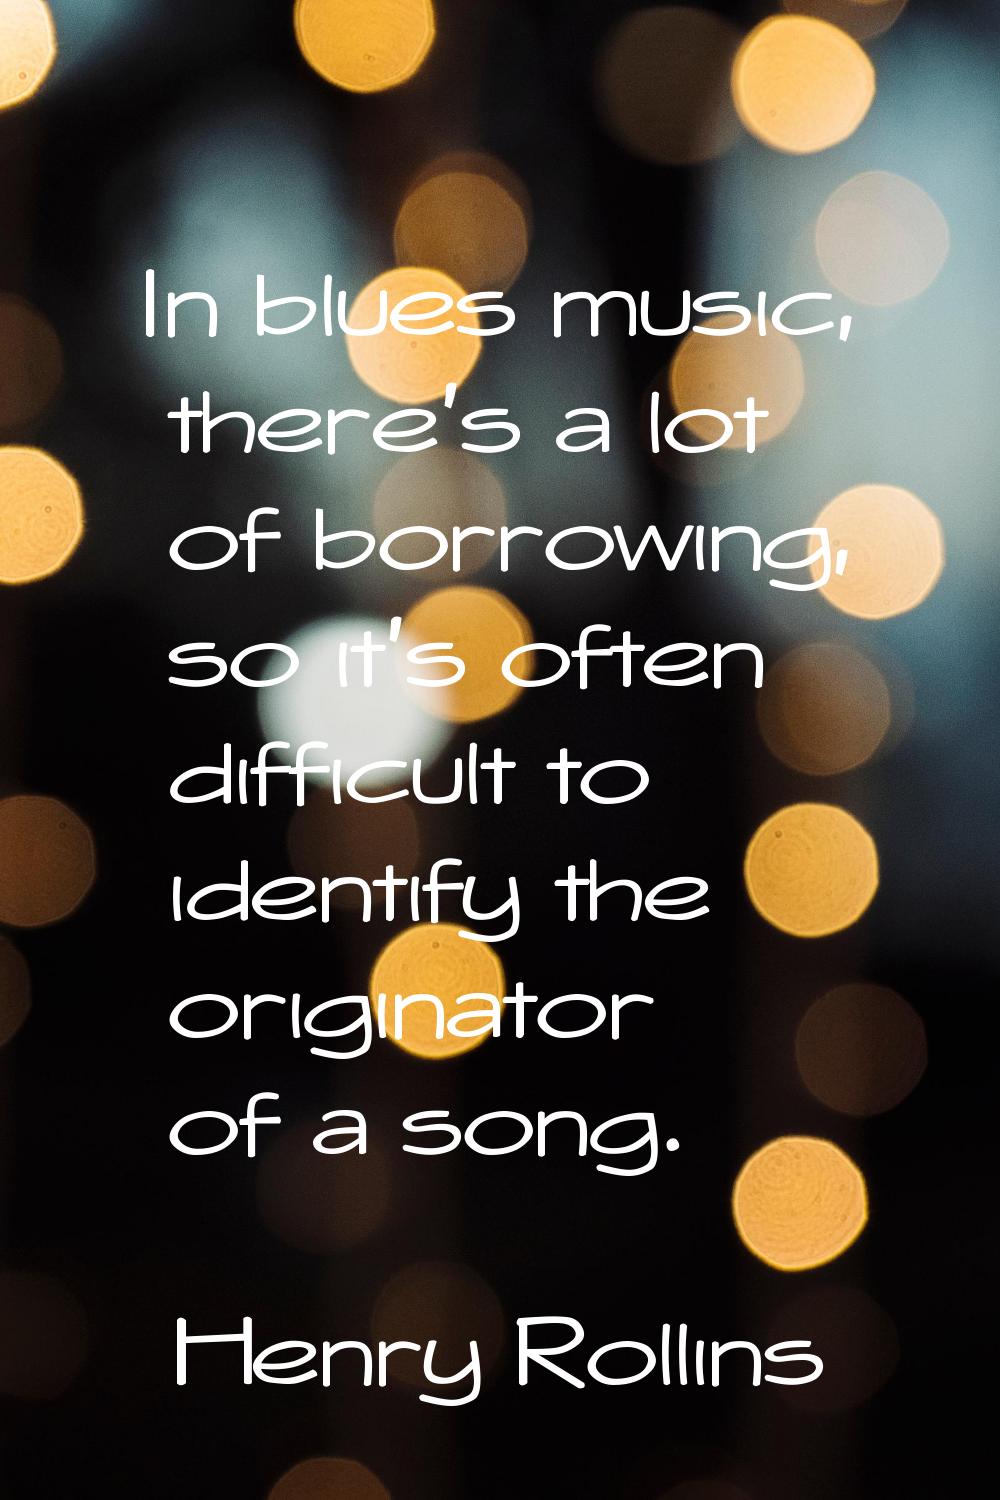 In blues music, there's a lot of borrowing, so it's often difficult to identify the originator of a